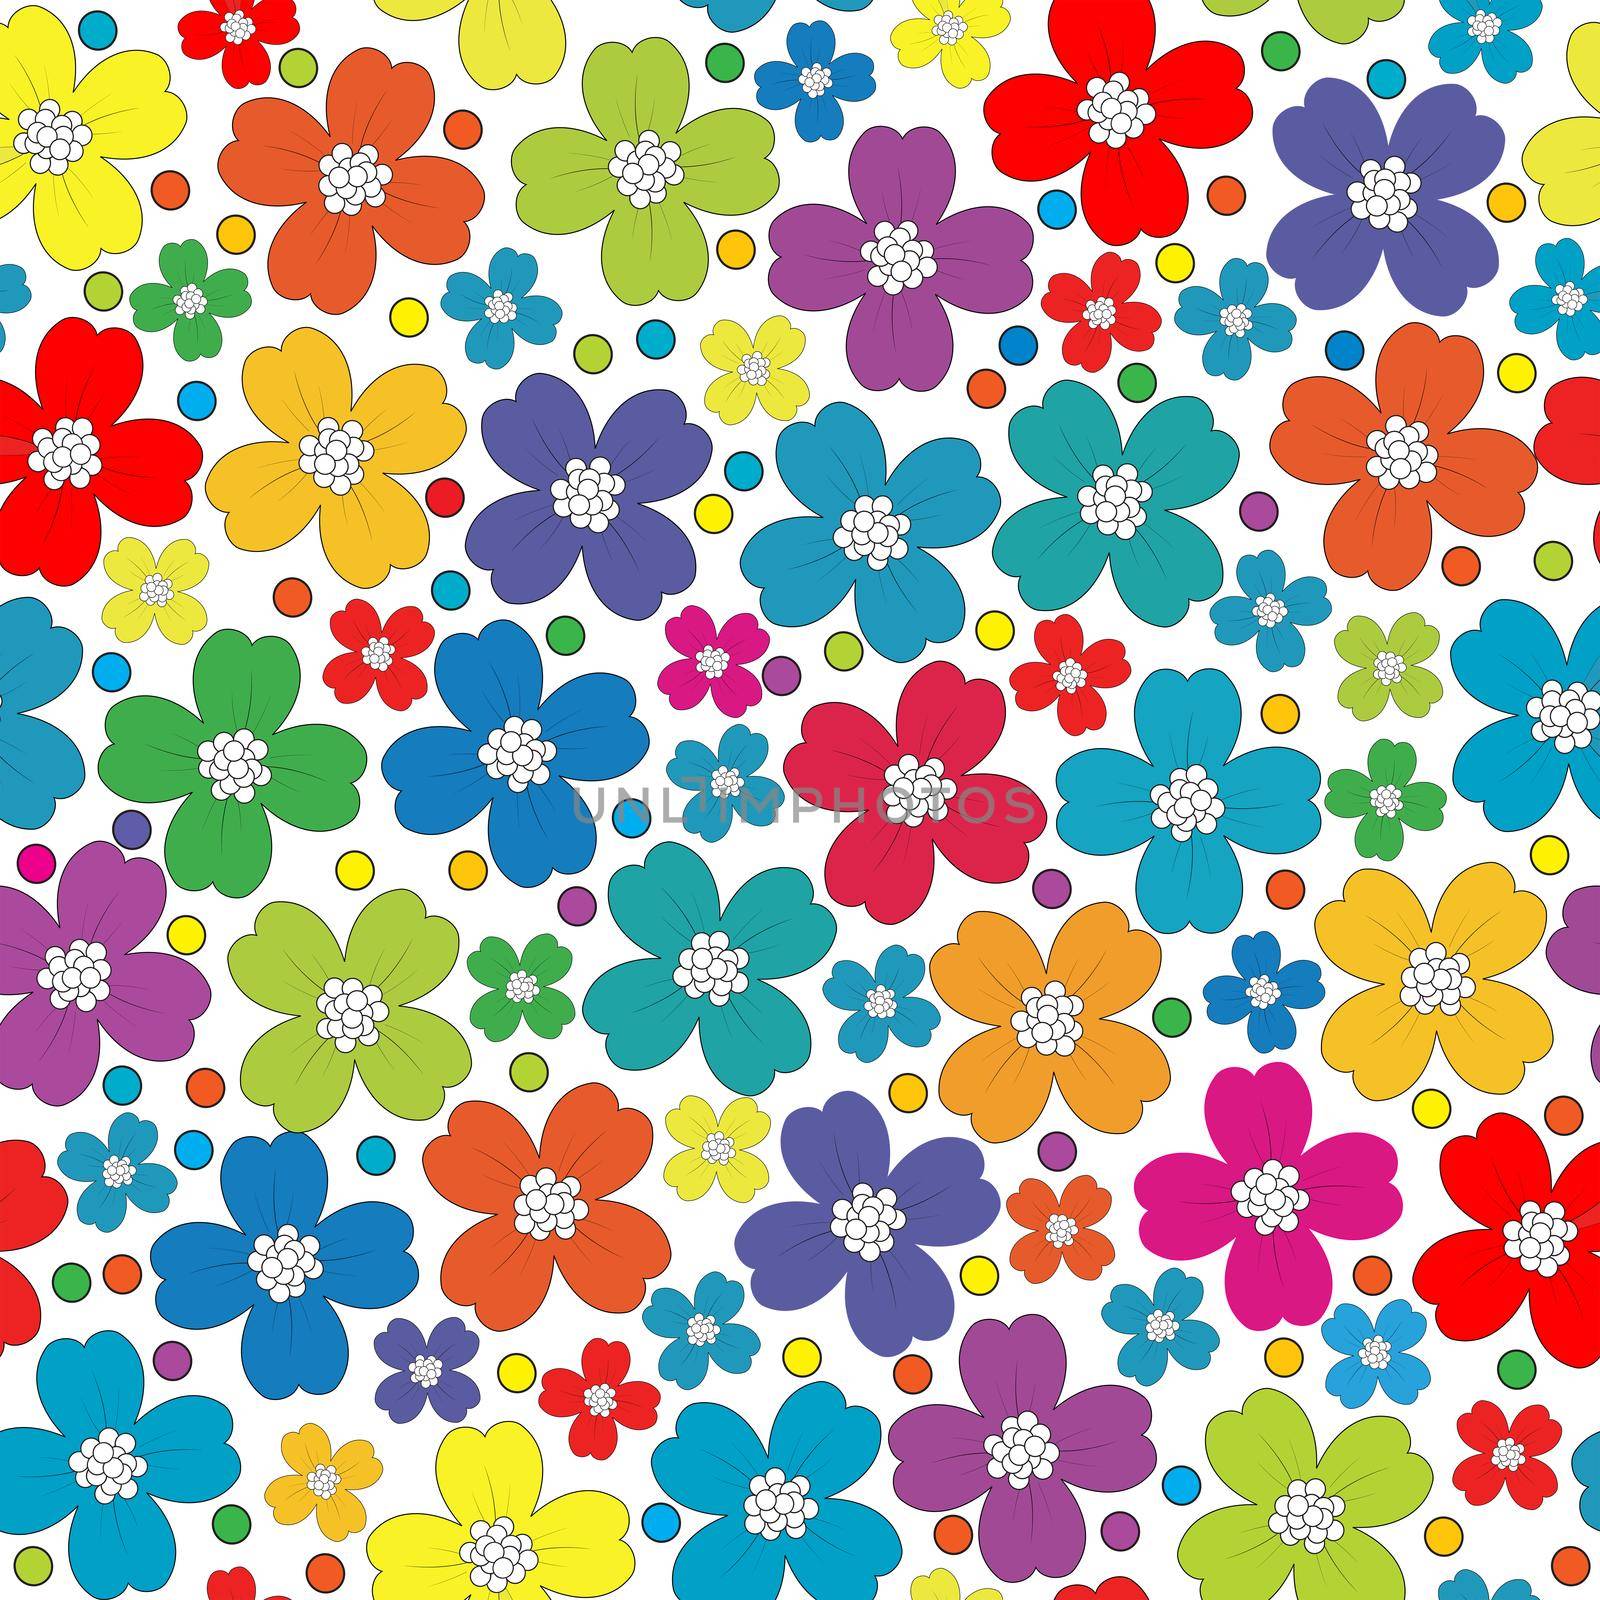 Colorful seamless pattern with flowers by hibrida13